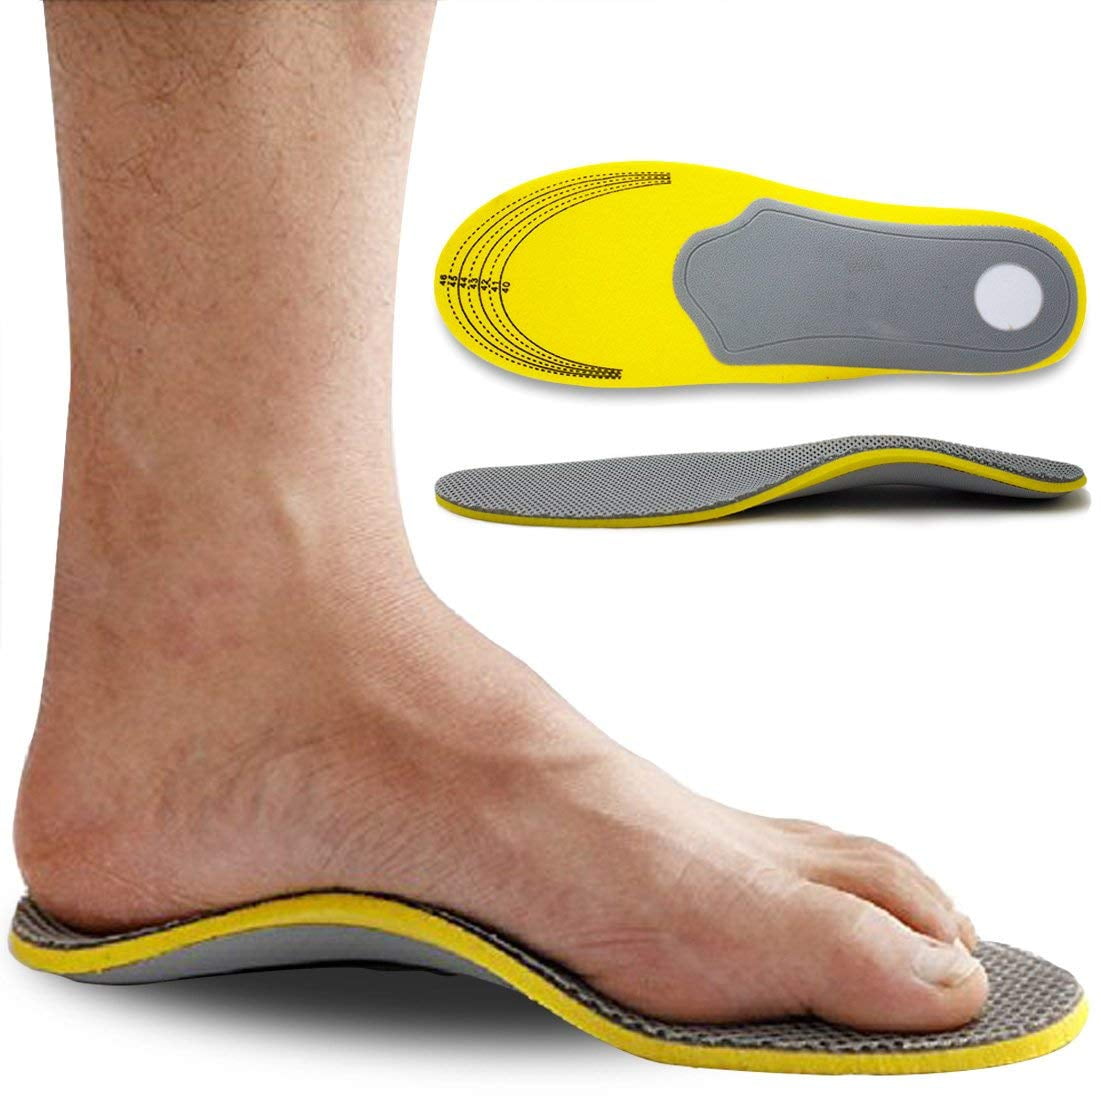 Kids Orthotic Flat Feet Arch Support Shoe Insoles Heel Pain Plantar Fasciitis 